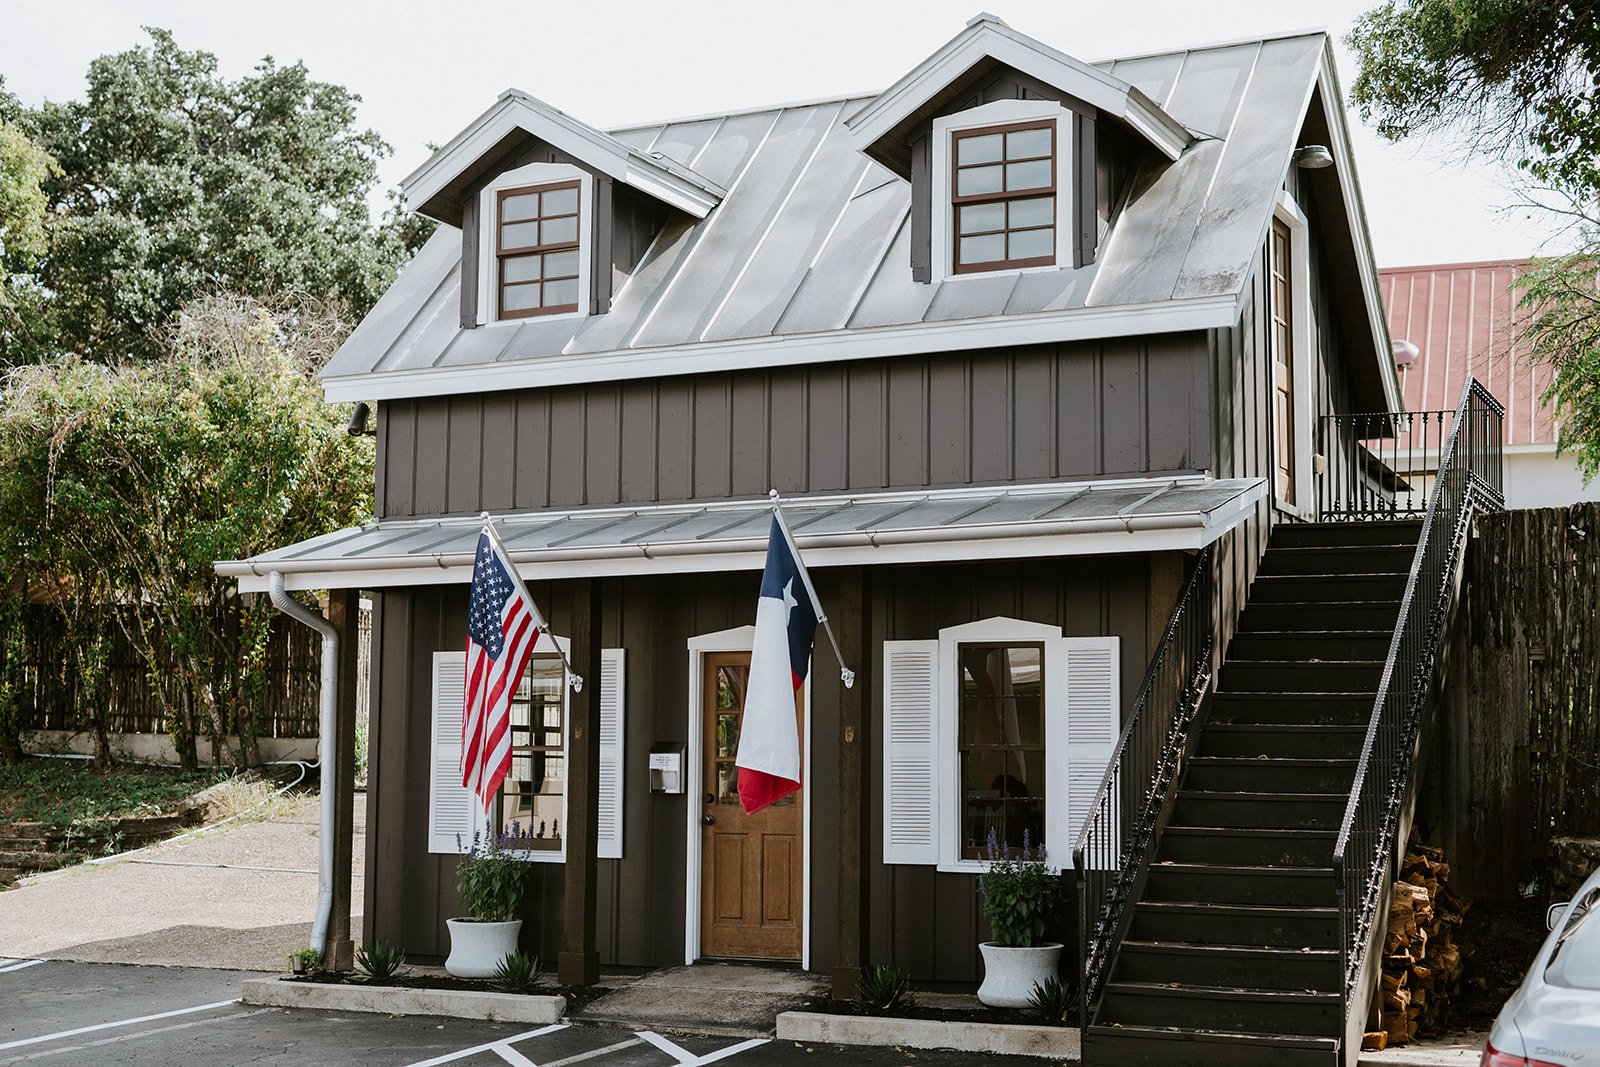 Texas Hill Country lodge